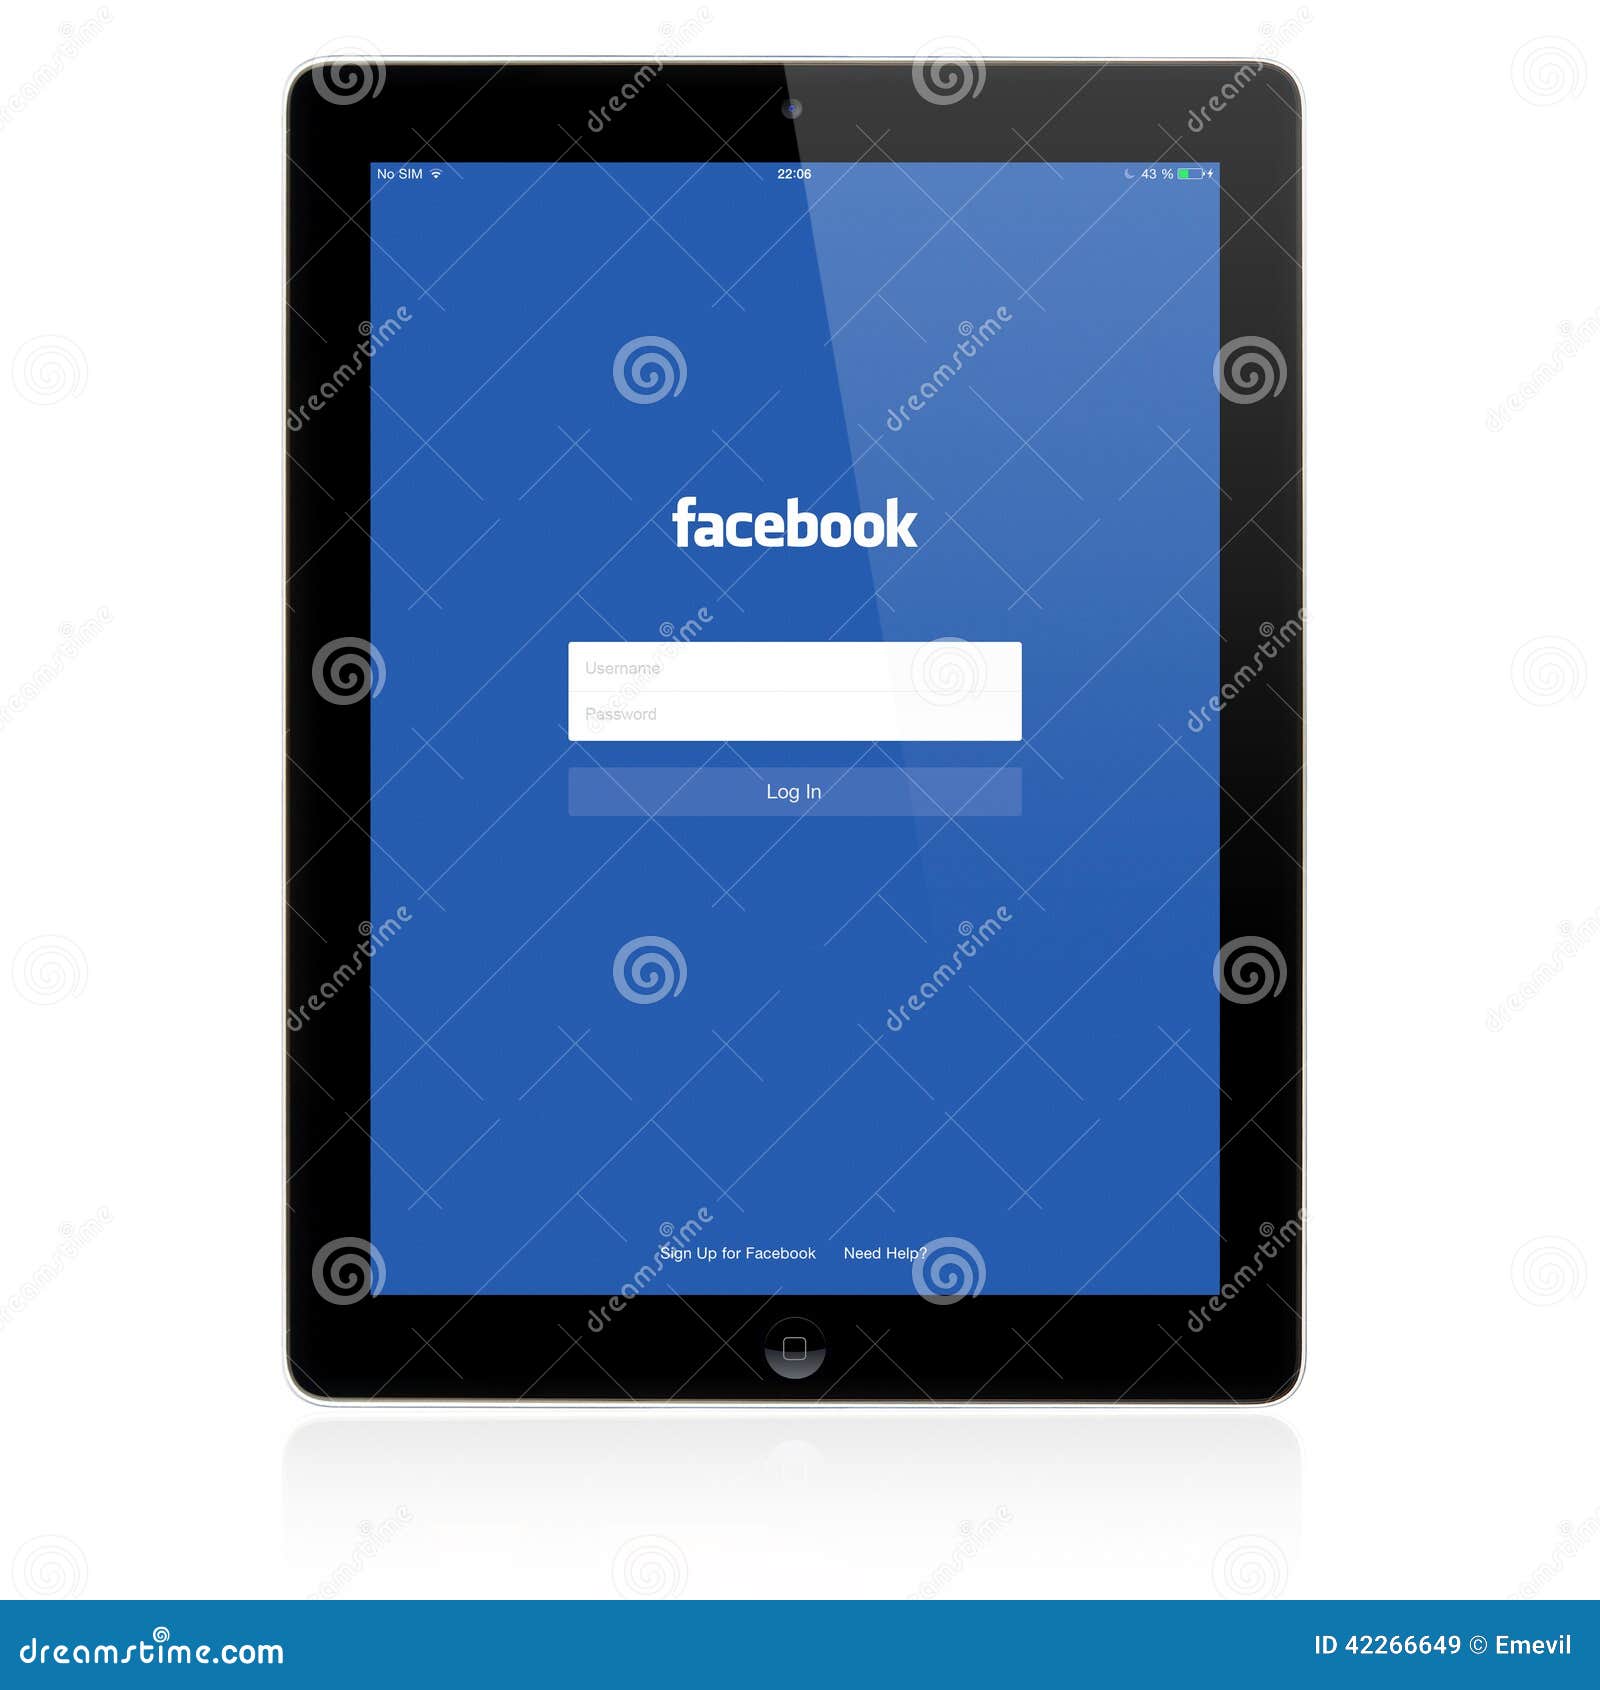 Facebook Login Page On Apple Ipad Screen Editorial Stock Image Image Of Brand Communication